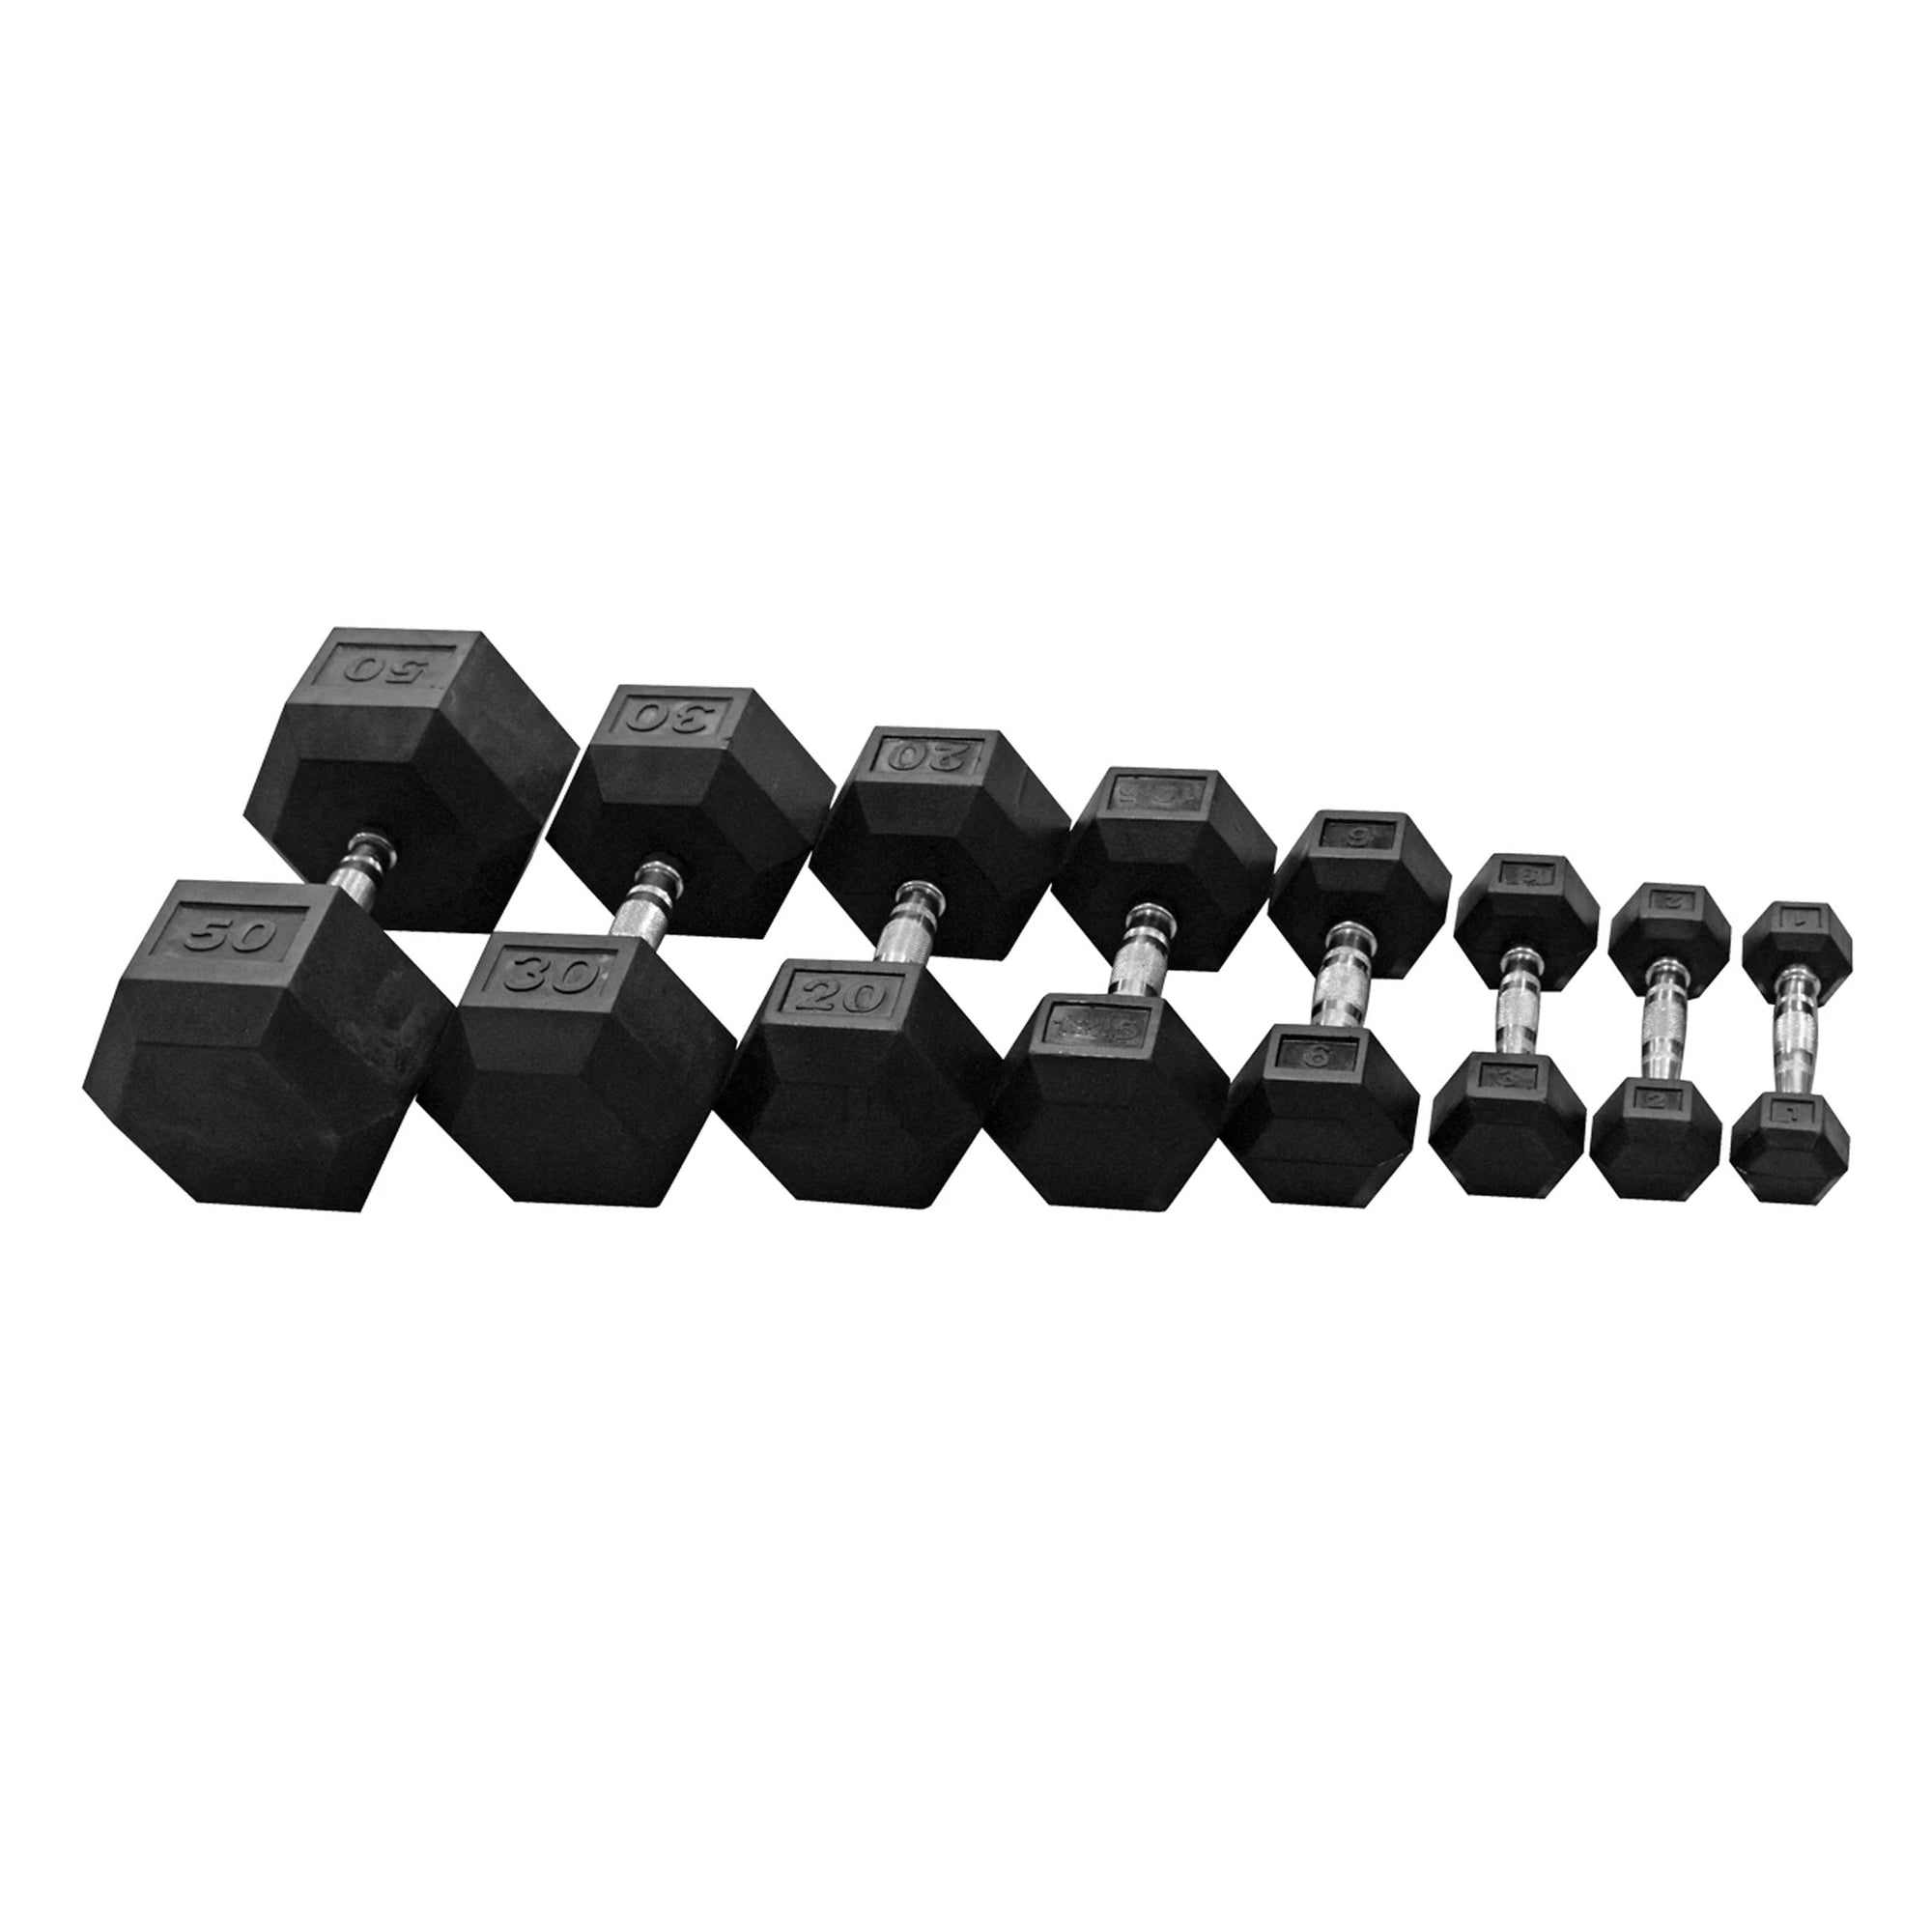 FitWay Equip. Rubber Hex Dumbbell Pair - 5lb